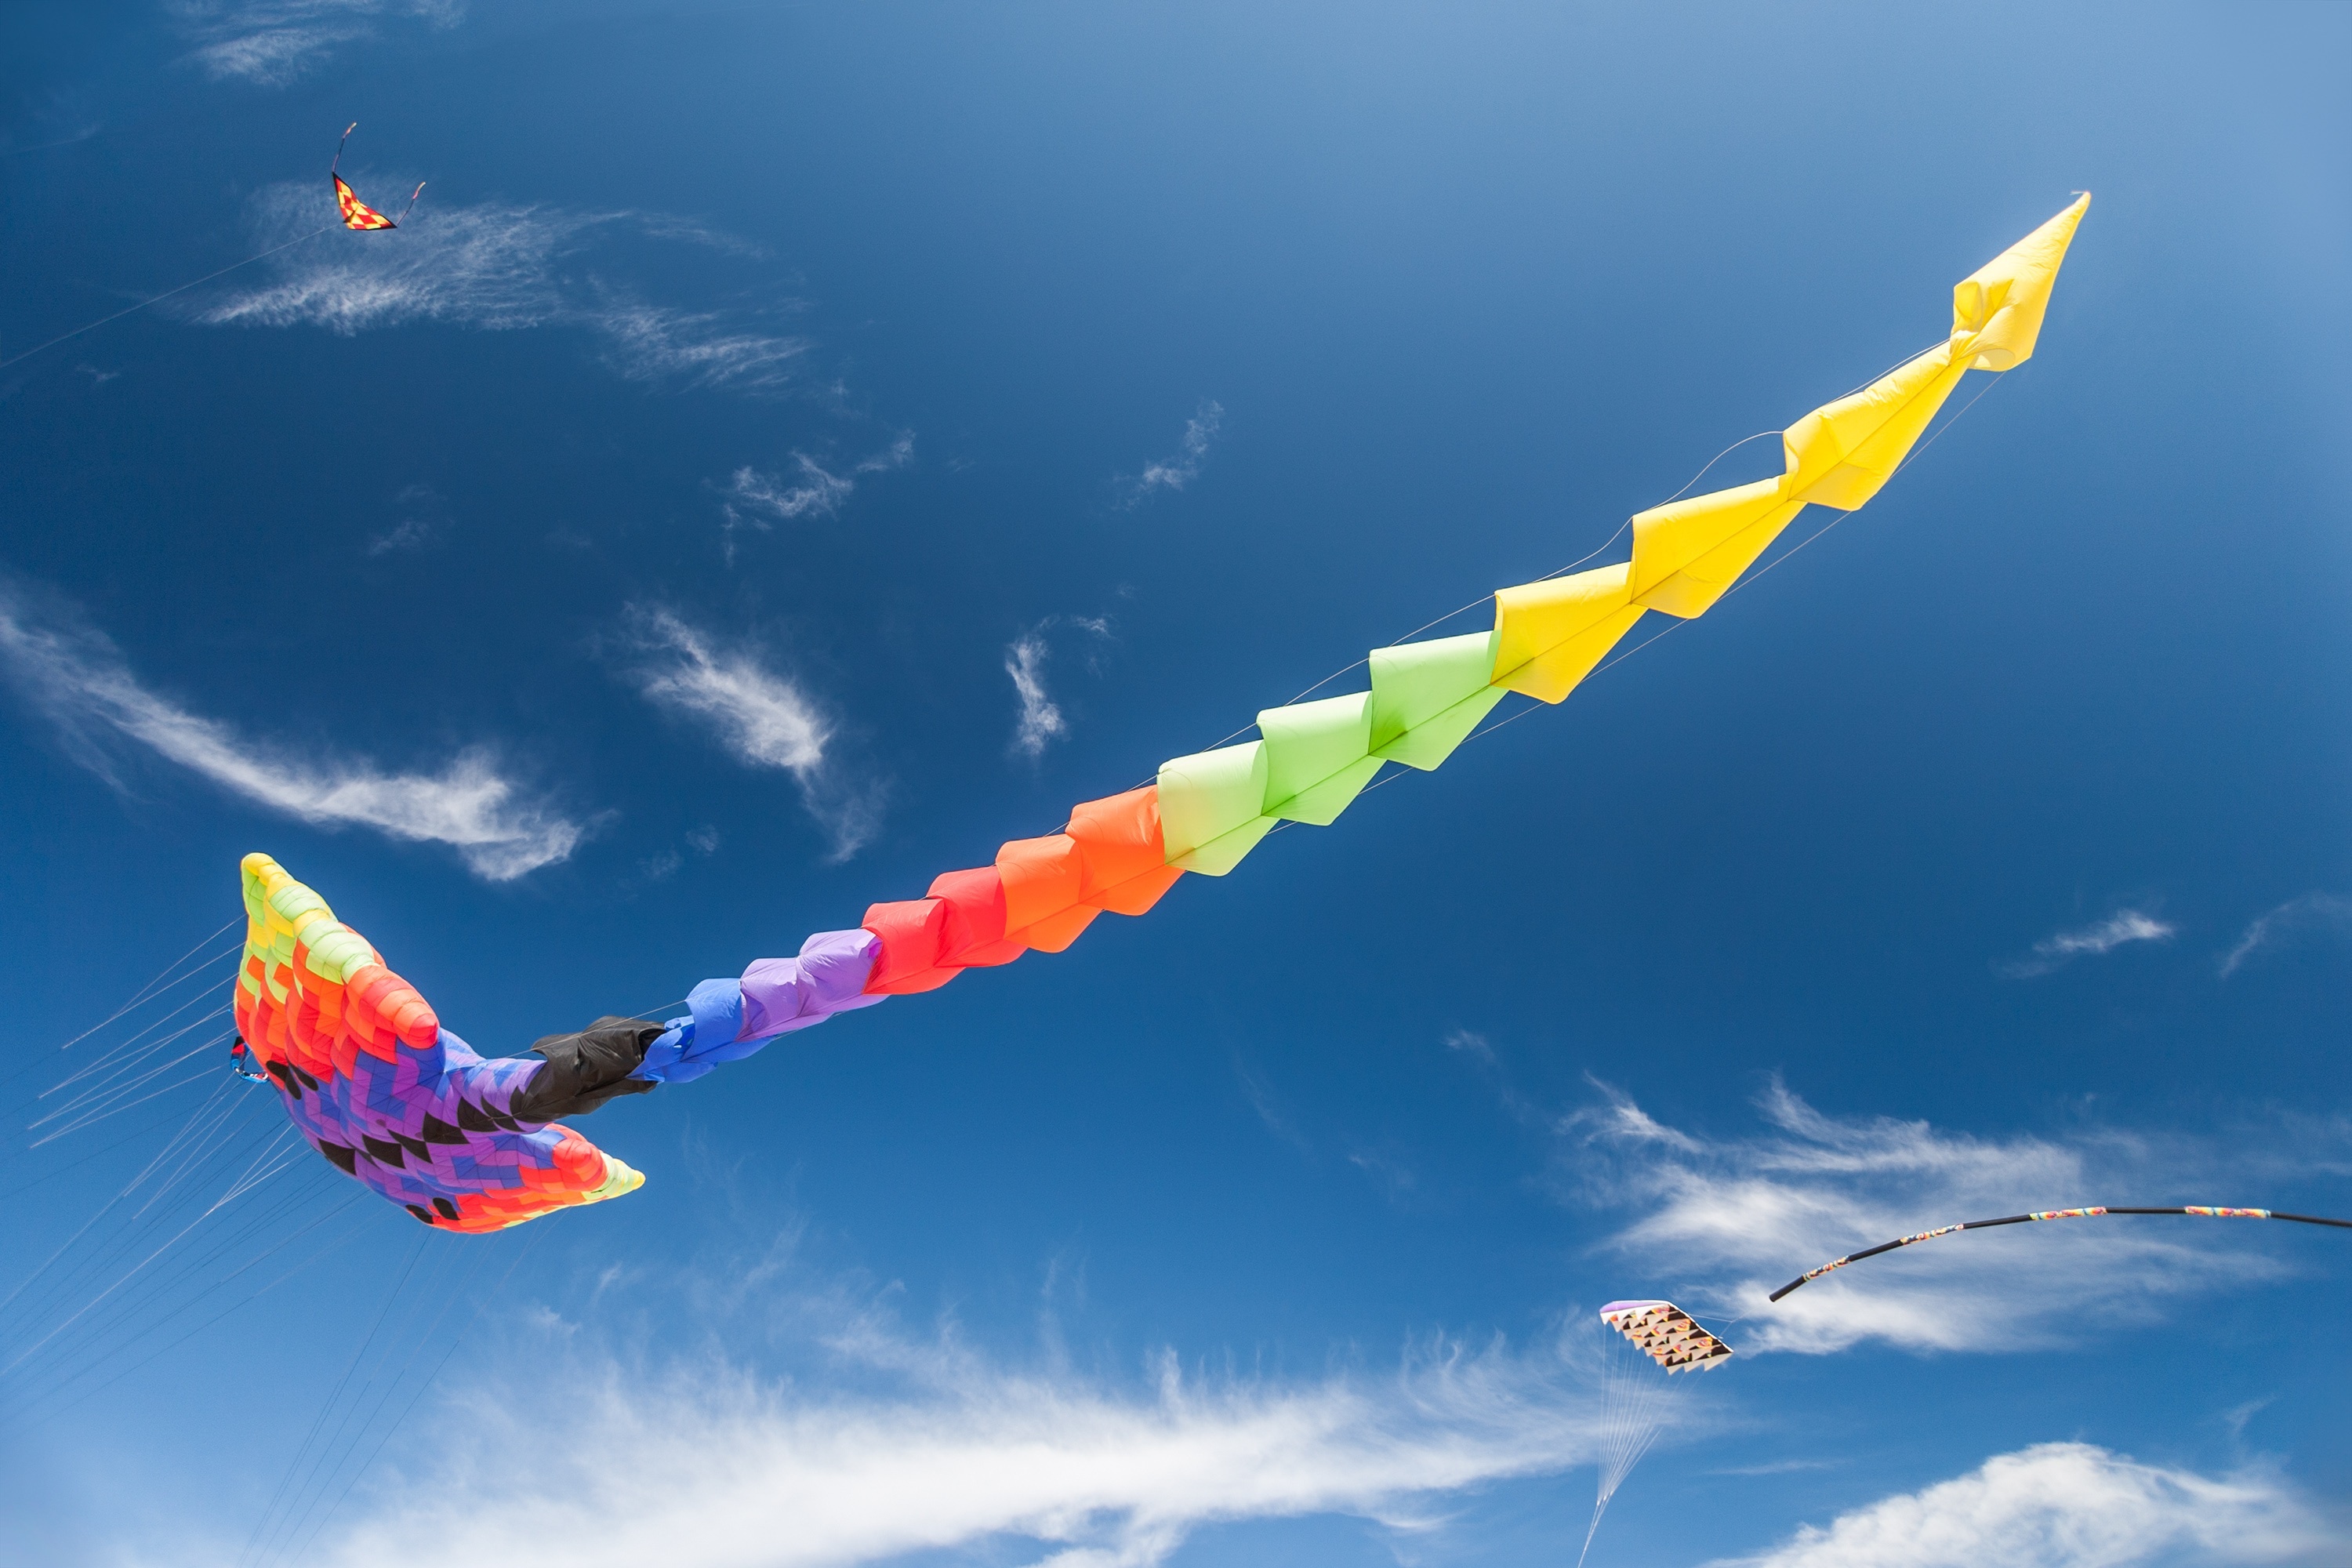 Kite Sports: Large colorful rainbow kite with a tail, Flying a kite experience, 400 feet (0.12 km) of line. 3000x2000 HD Wallpaper.